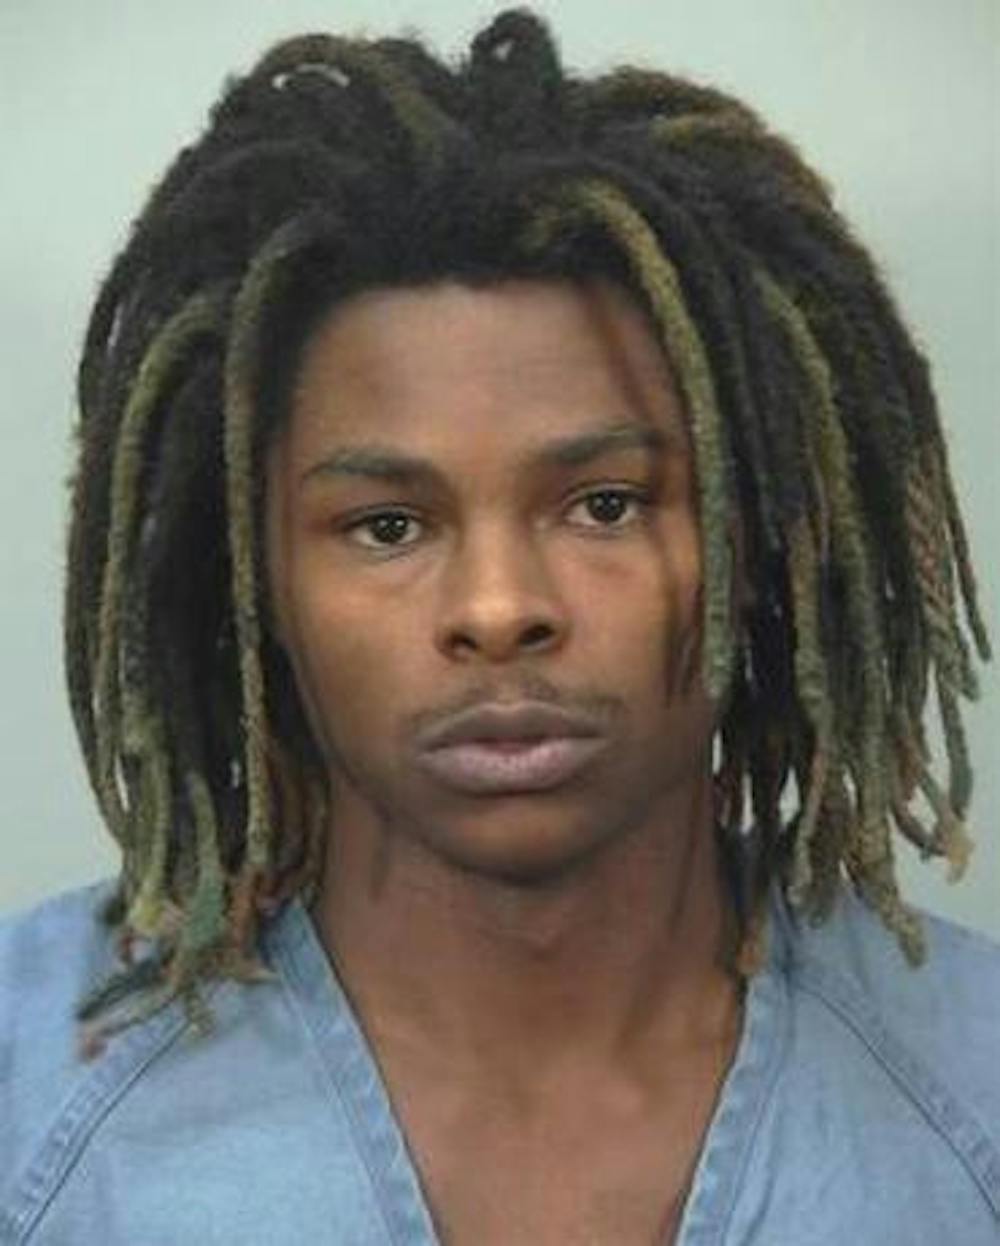 Xavier Davis, 20, is a suspect of gang activity and has multiple bench warrants.